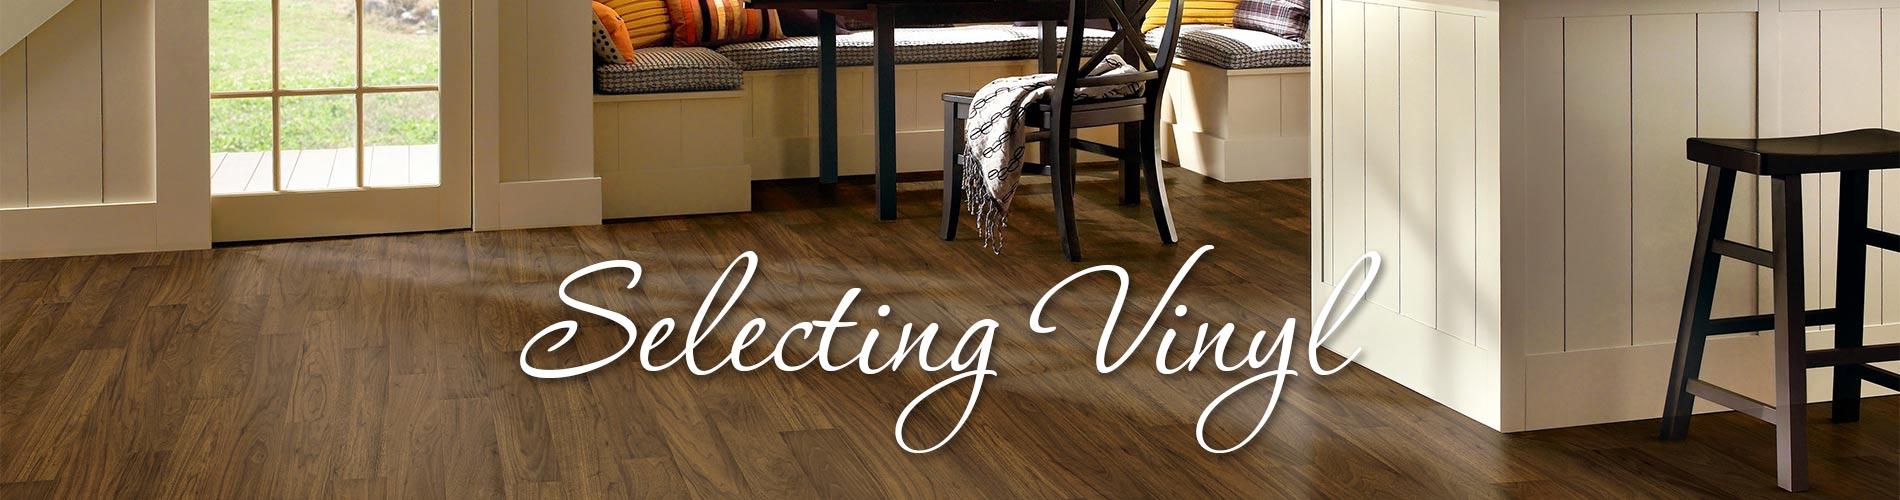 Selecting Vinyl Flooring for your home